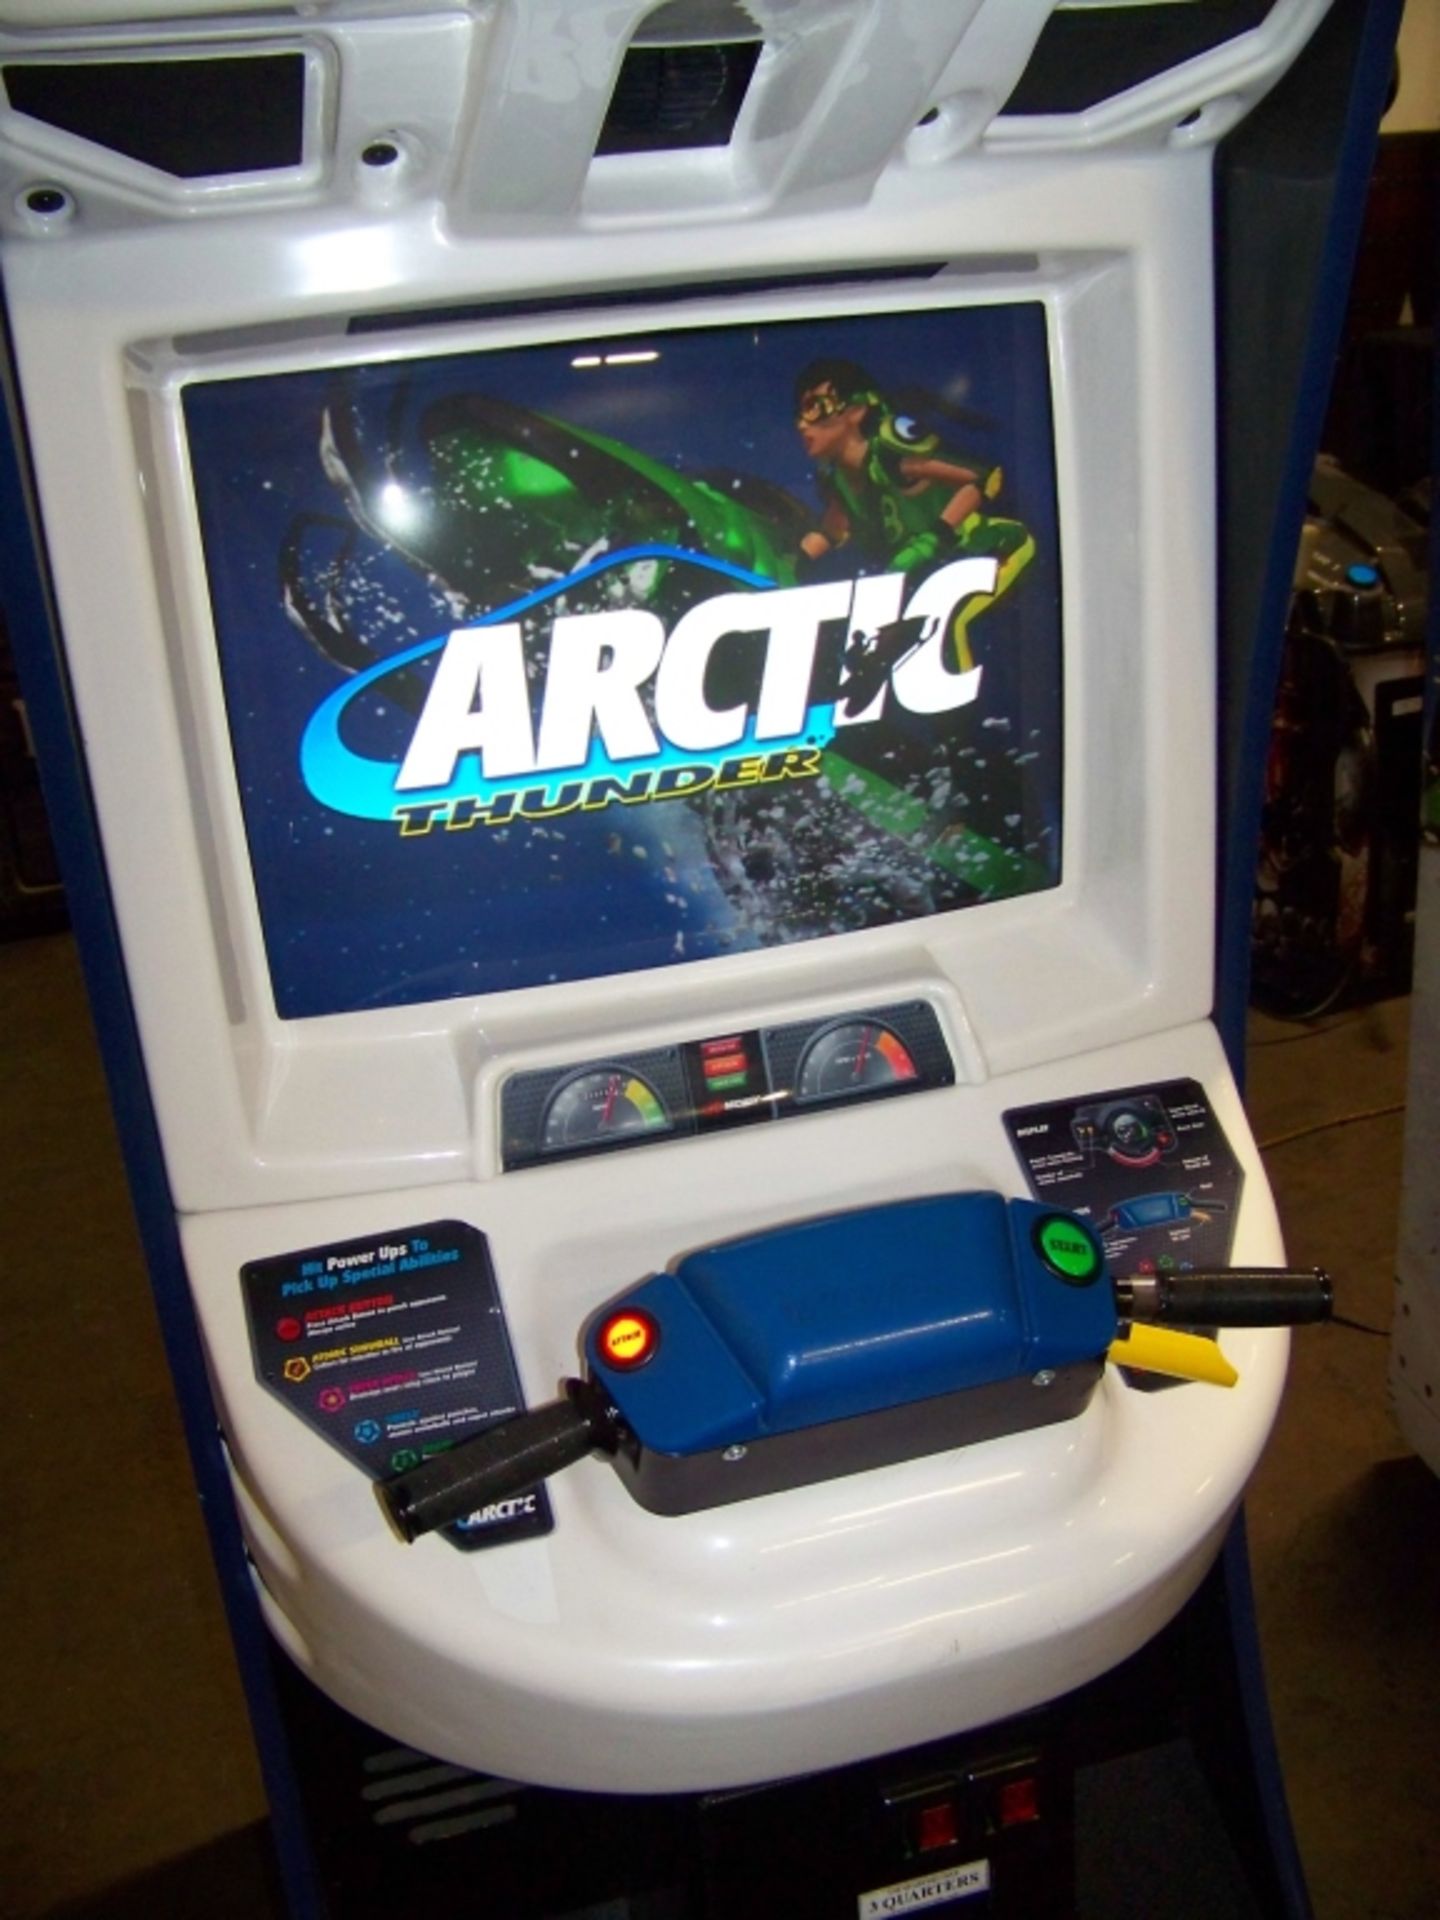 ARCTIC THUNDER RACING ARCADE GAME MIDWAY - Image 2 of 6